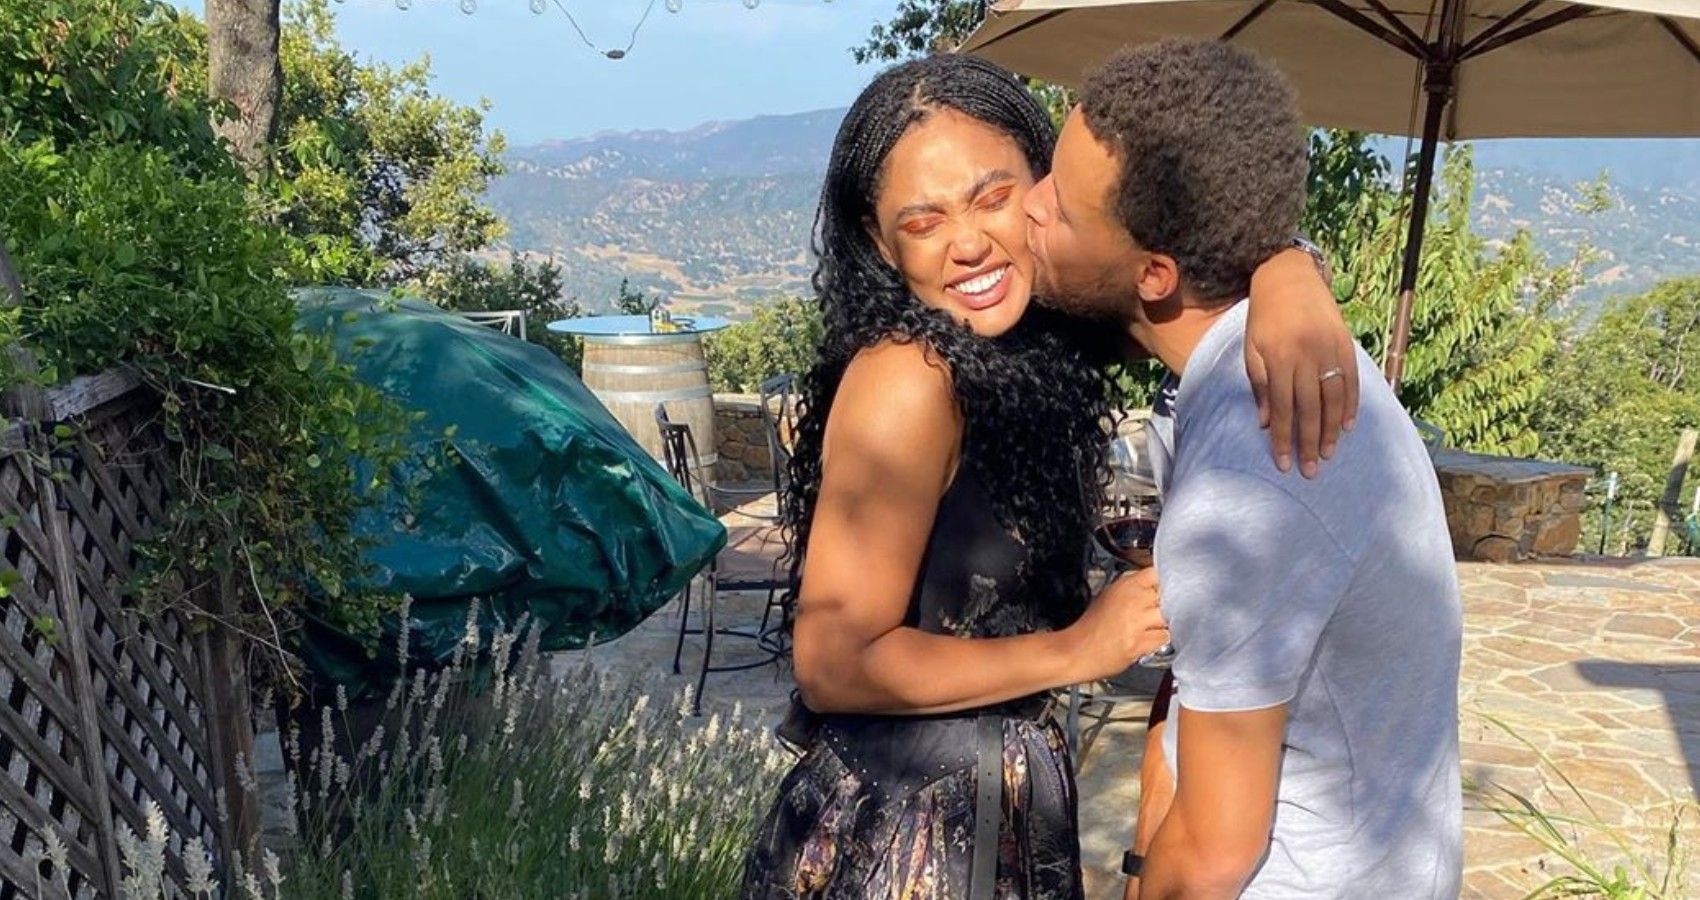 Stephen Curry giving Ayesha Curry a kiss on the cheek